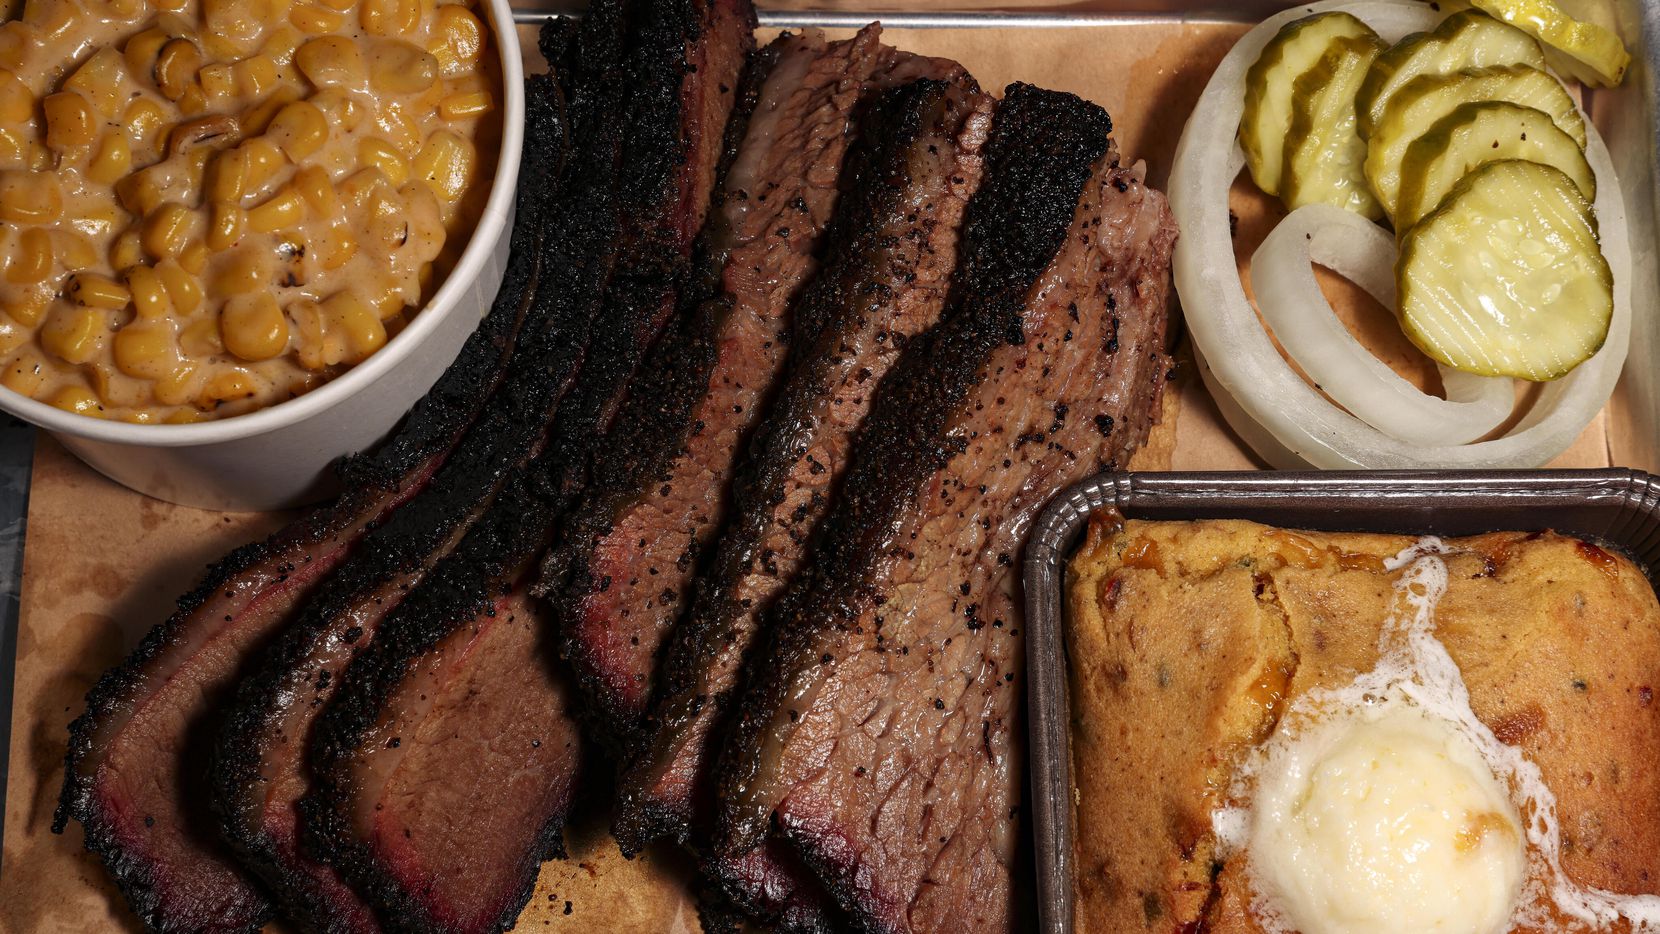 True Texas BBQ is the restaurant inside H-E-B's new grocery store in Frisco. A top seller is...